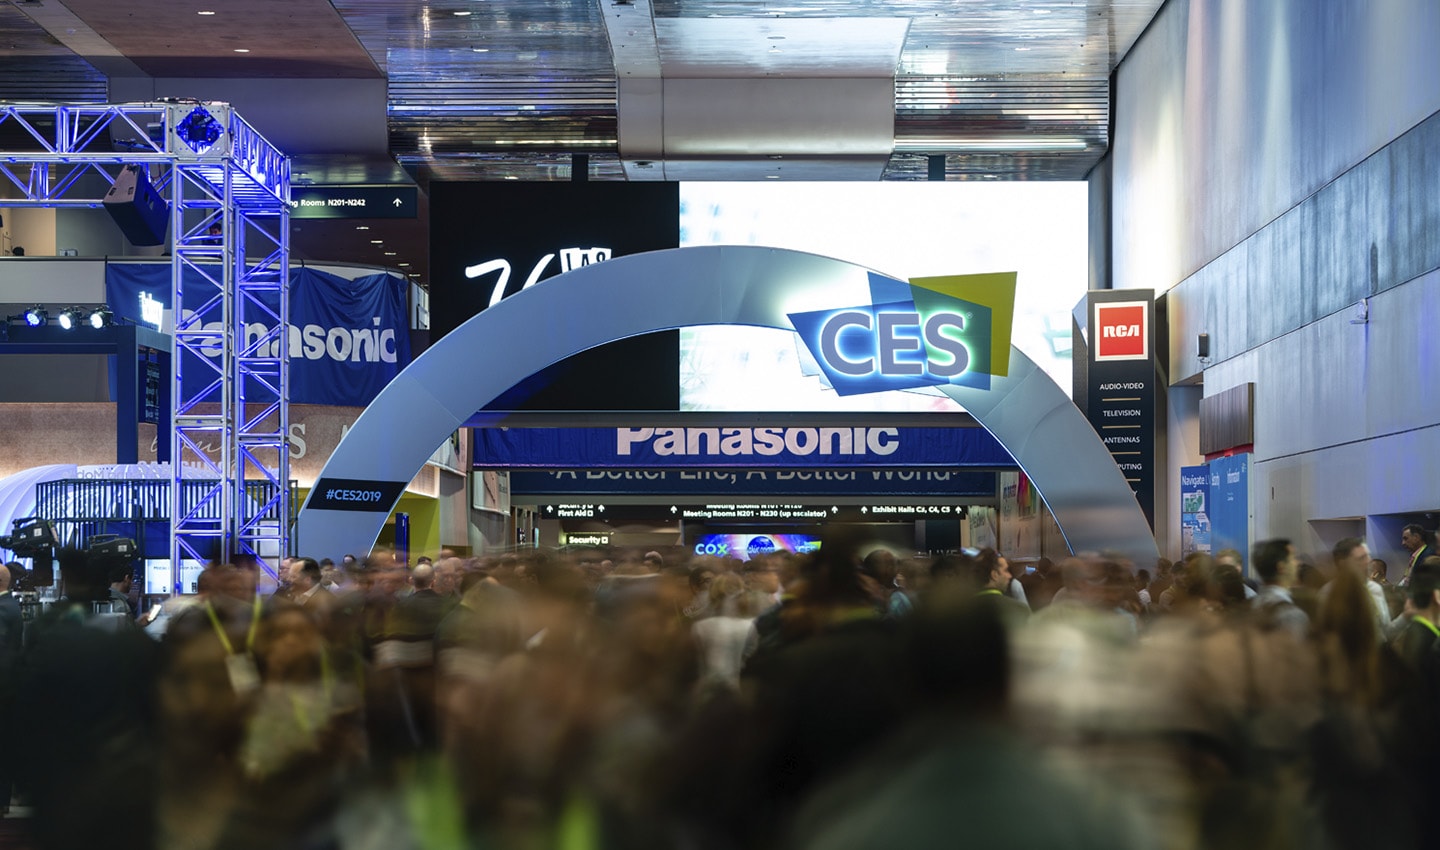 CES is still going ahead, but there won’t be as many people there as usual. We’re still keen to experience as much of it as possible, even from distance.